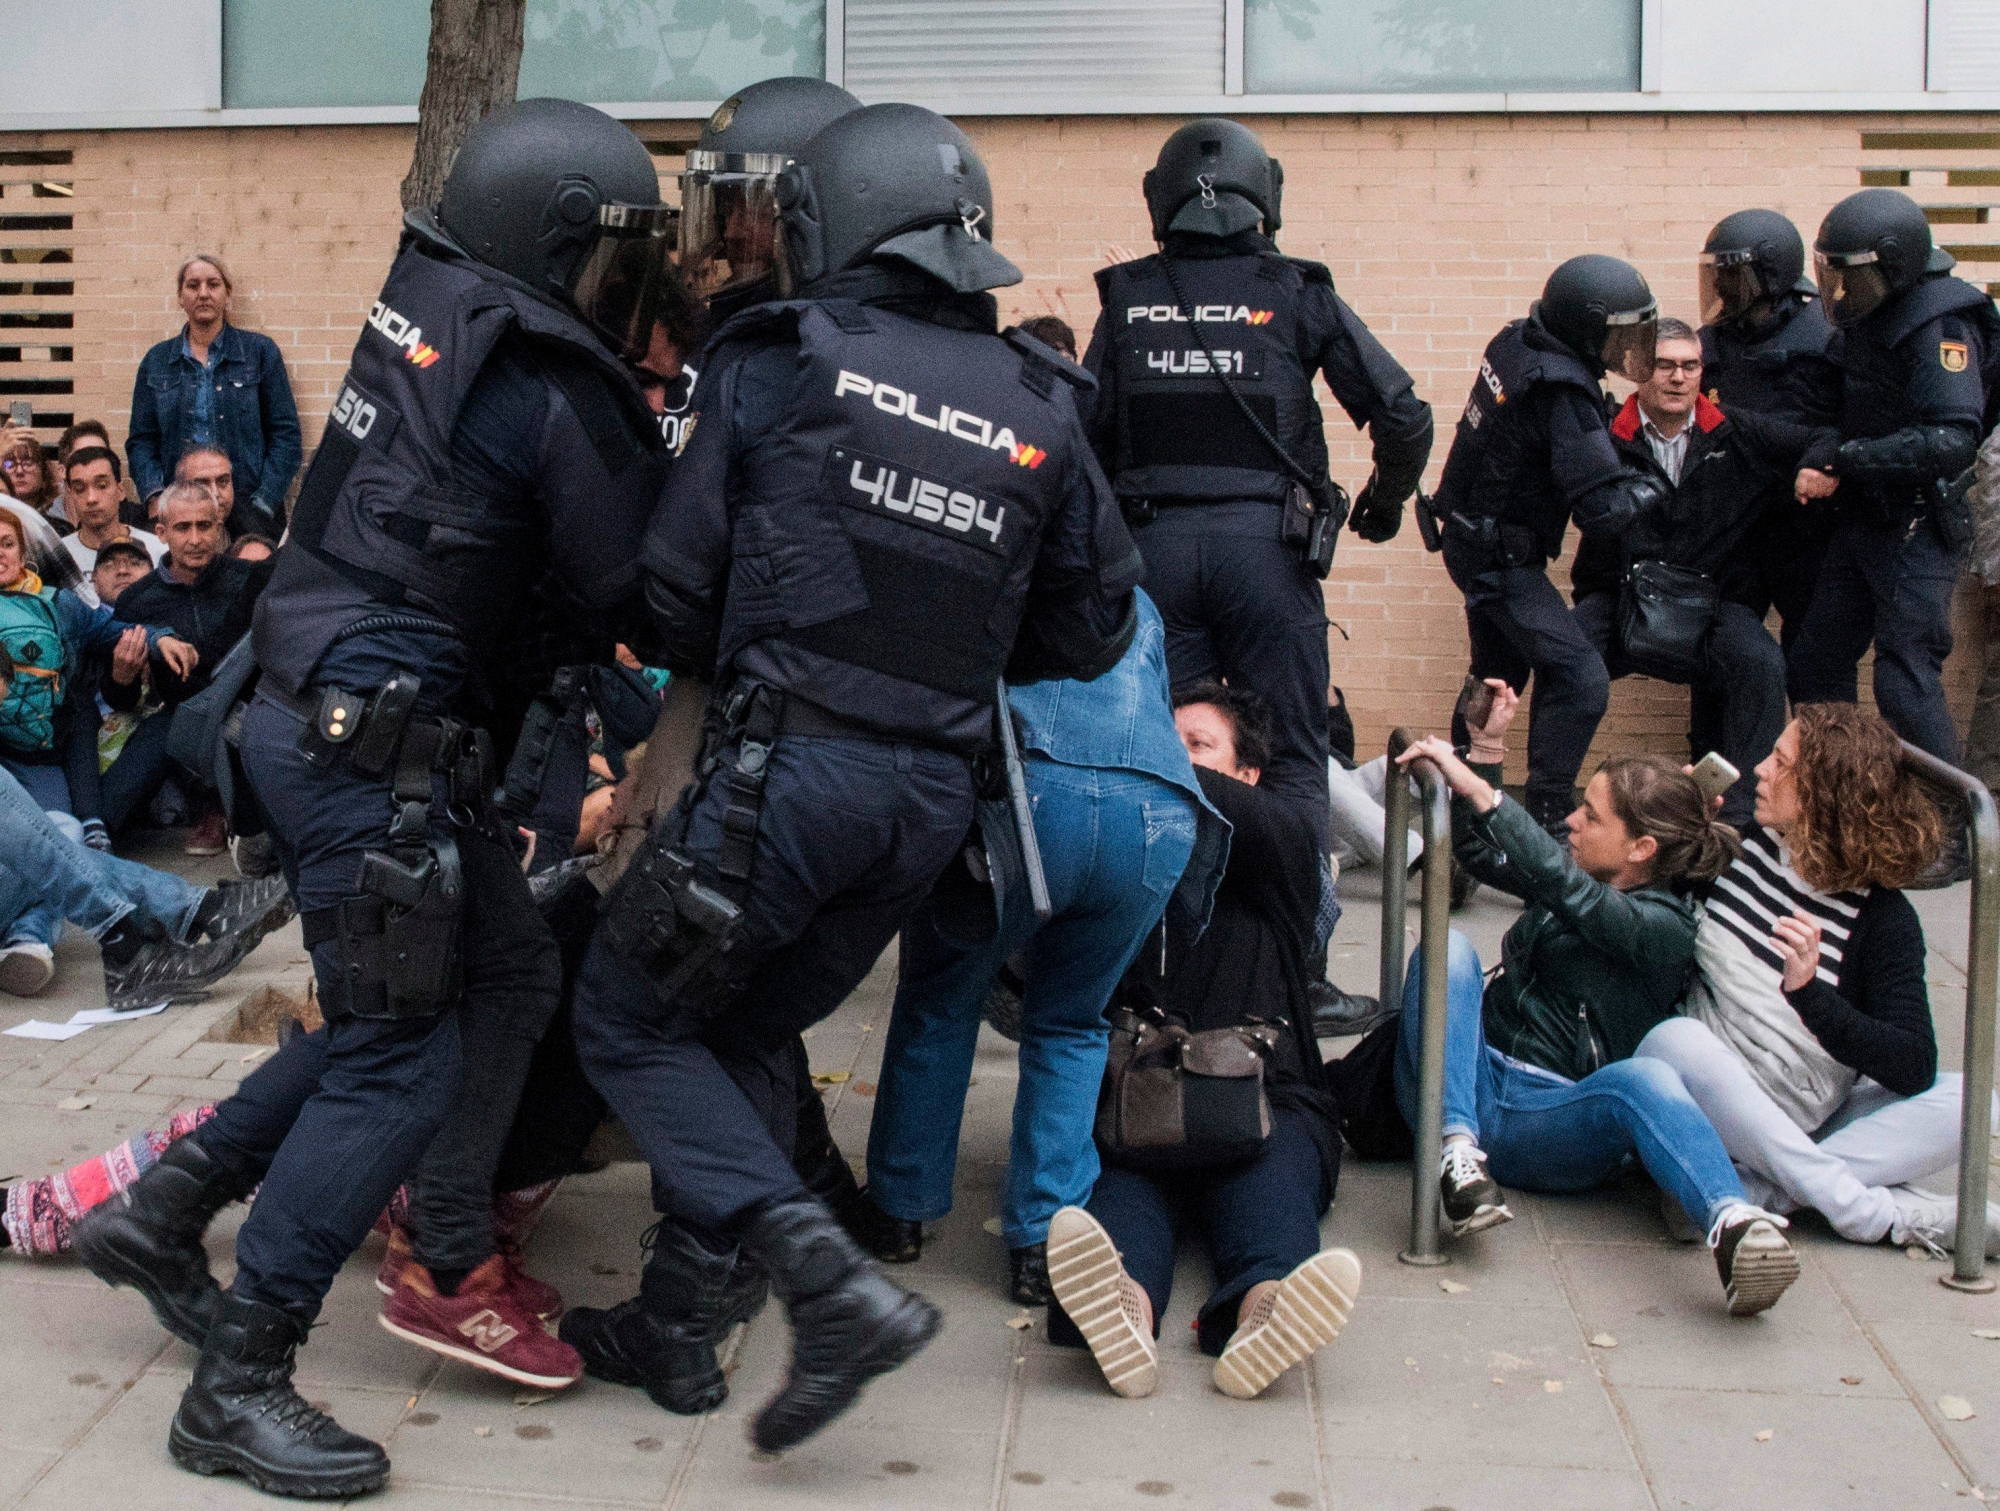 epa06237424 Catalan people clash with police outside at a polling center set at a health clinic clash with Spanish National Police officers after police forces seized ballot boxes during the '1-O Referendum' in Cappont, Lleida, Catalonia, northeastern Spain, on 01 October 2017. National Police officers and Civil guards have been deployed to seize voting material and to prevent the people from entering to the polling centers and vote in the Catalan independence referendum, that has been banned by the Spanish Constitutional Court, what has provocked clashes between pro-independence people and the police forces in some polling centers.  EPA/Adria Ropero SPAIN CATALONIA REFERENDUM